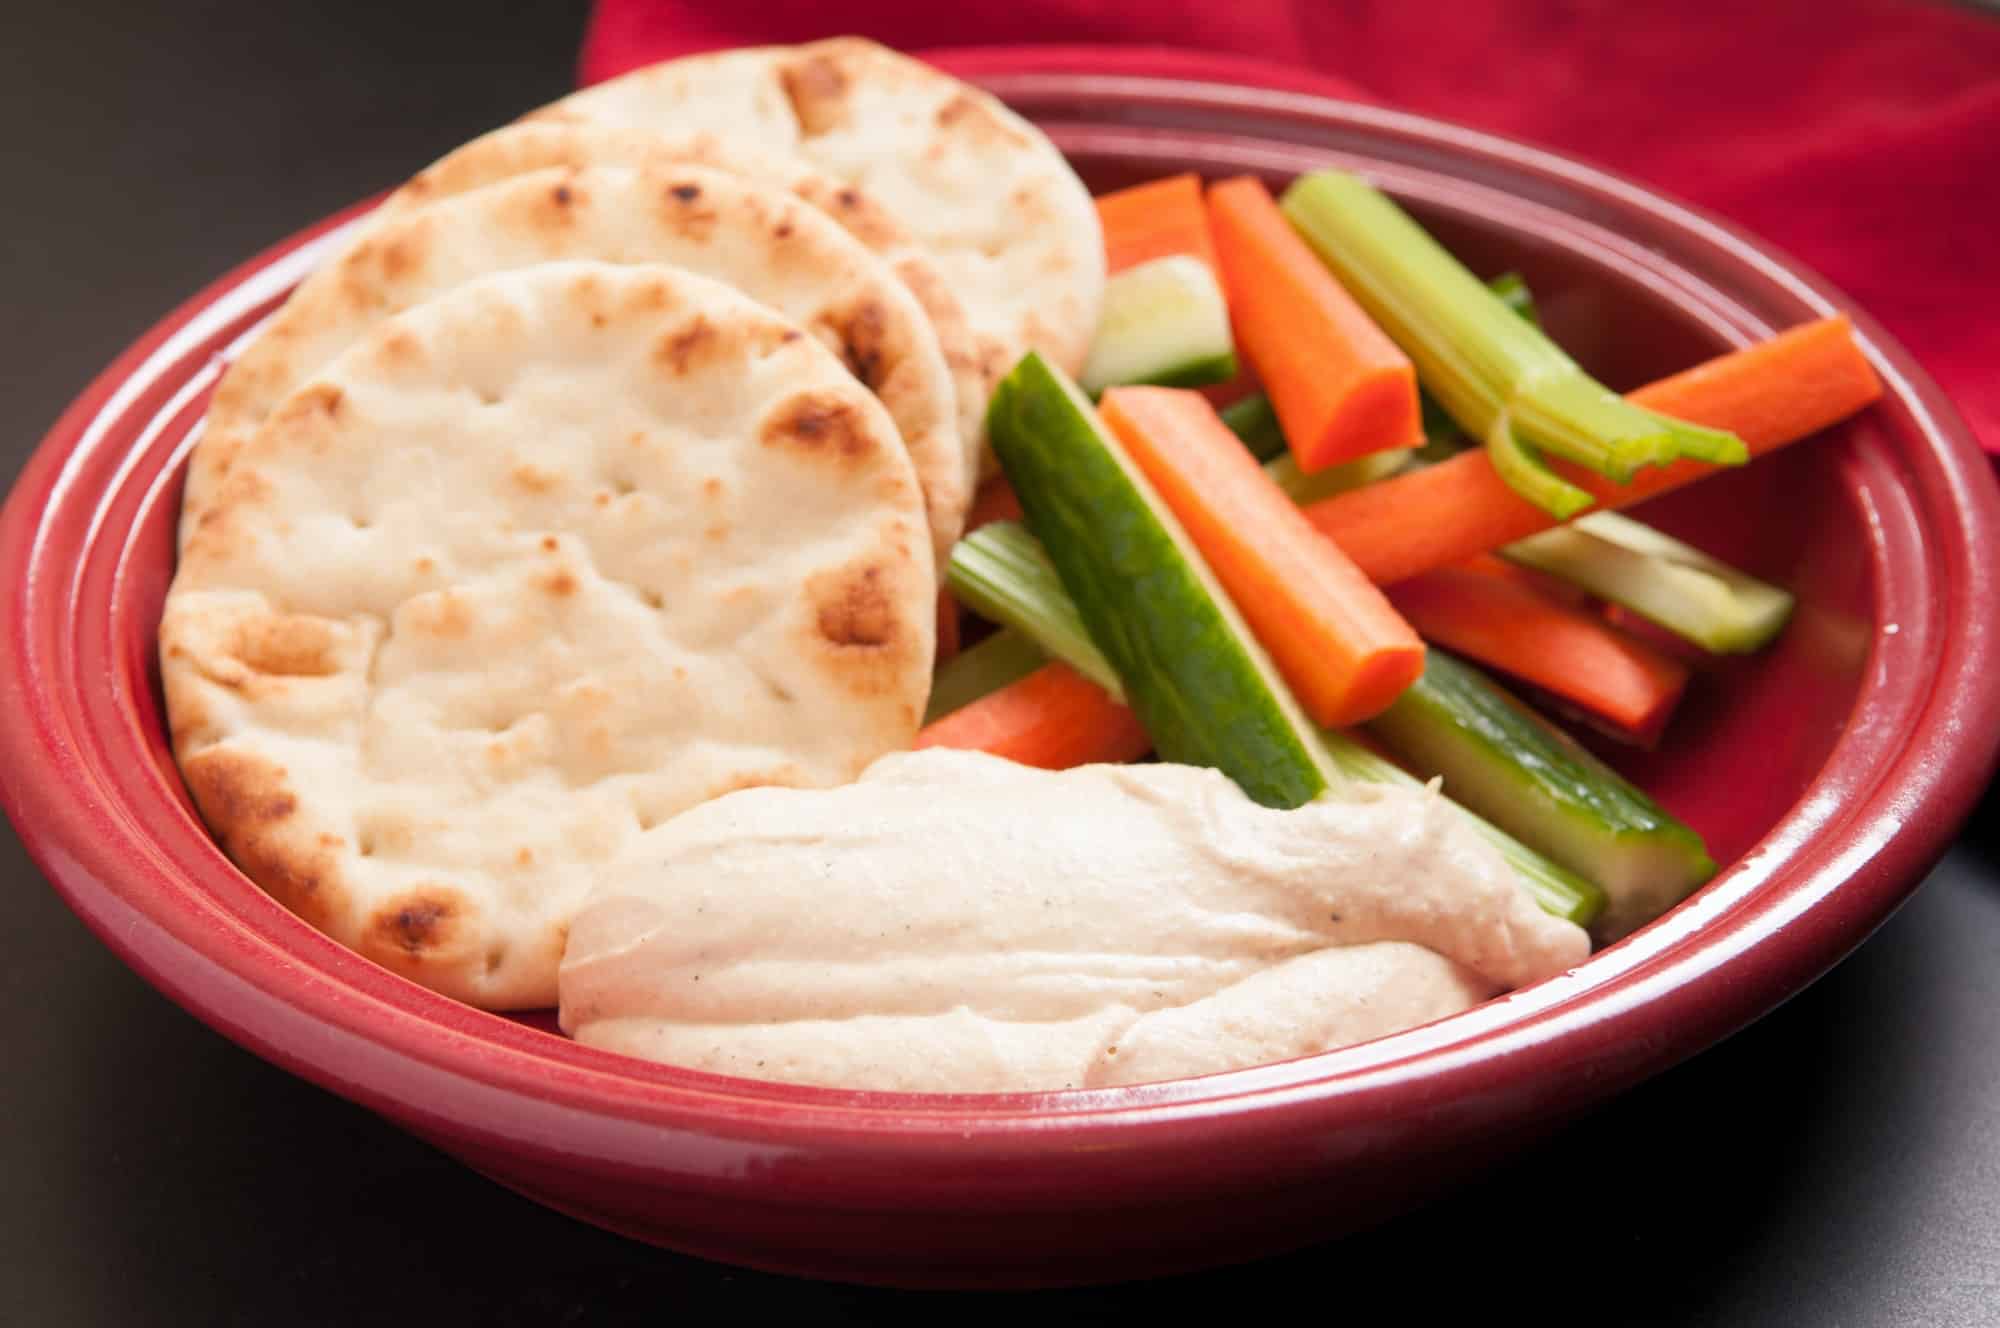 hummus with vegetable sticks and naan